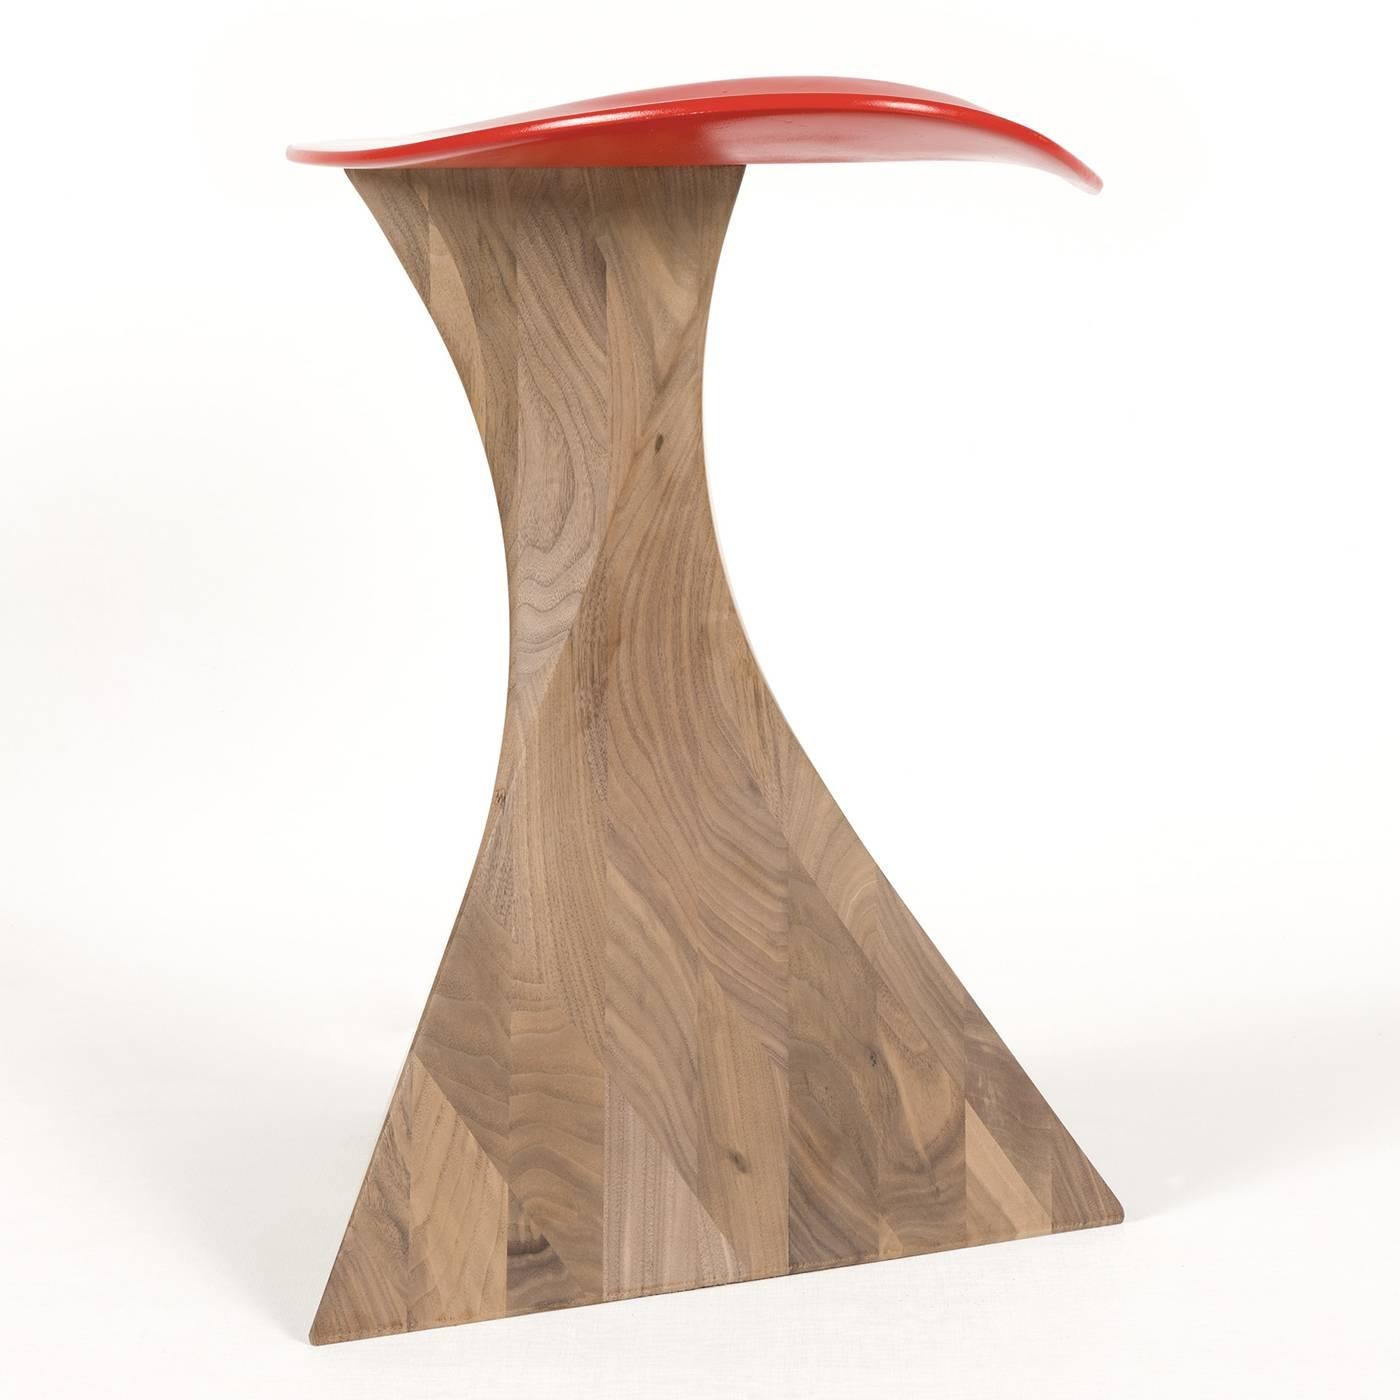 A harmonious union of design and functionality, this stool will add a touch of elegance to any room or study. Its geometric hourglass pedestal is rendered in solid walnut wood, and its faceted sides gracefully contrast with its curved silhouette.